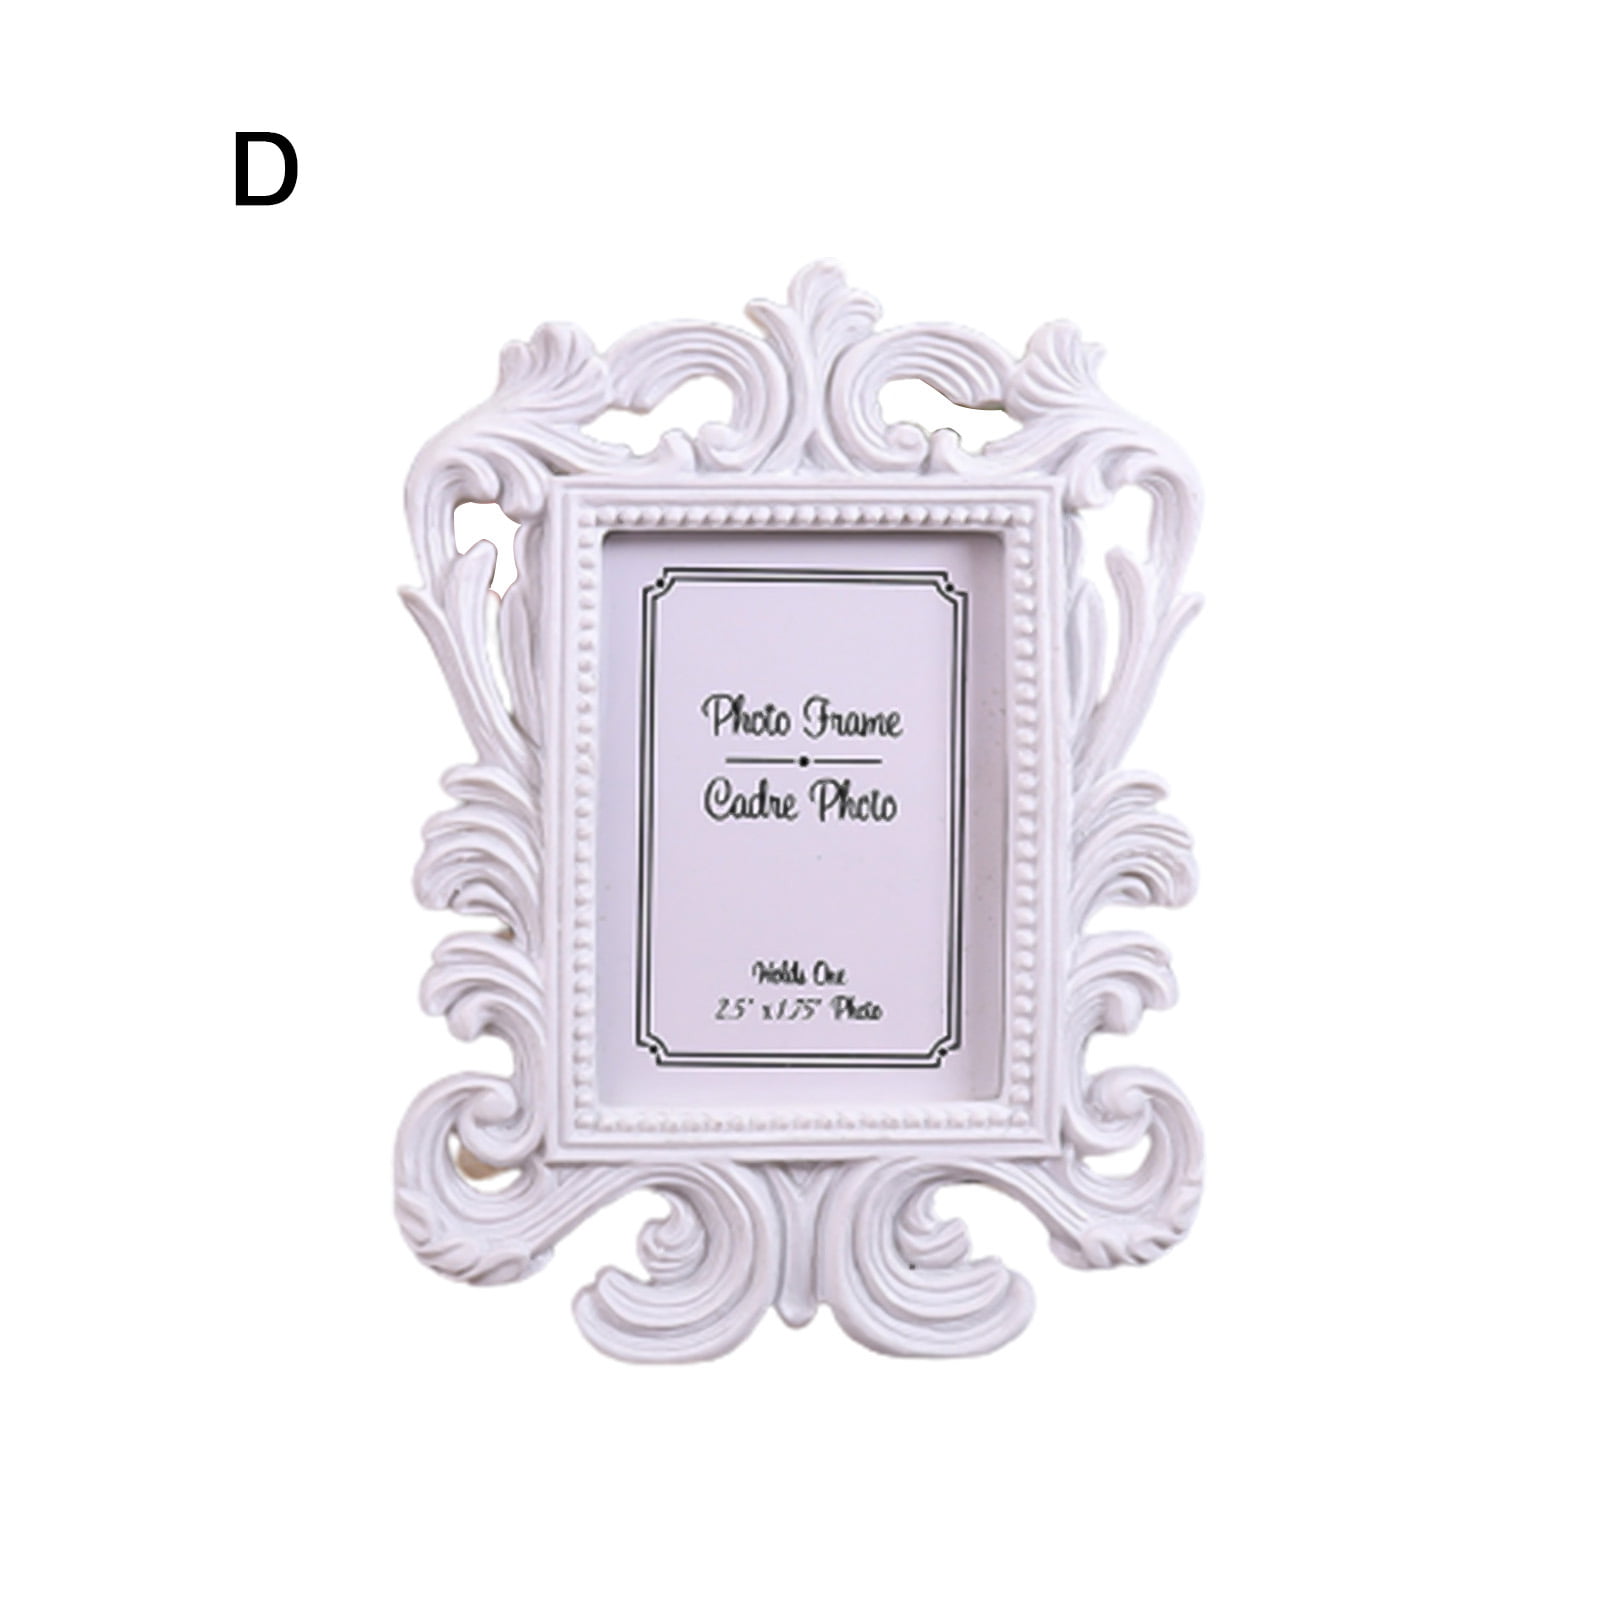 Oval/Rectangle Hollow Design Photo Frame Picture Holder Home Decor 